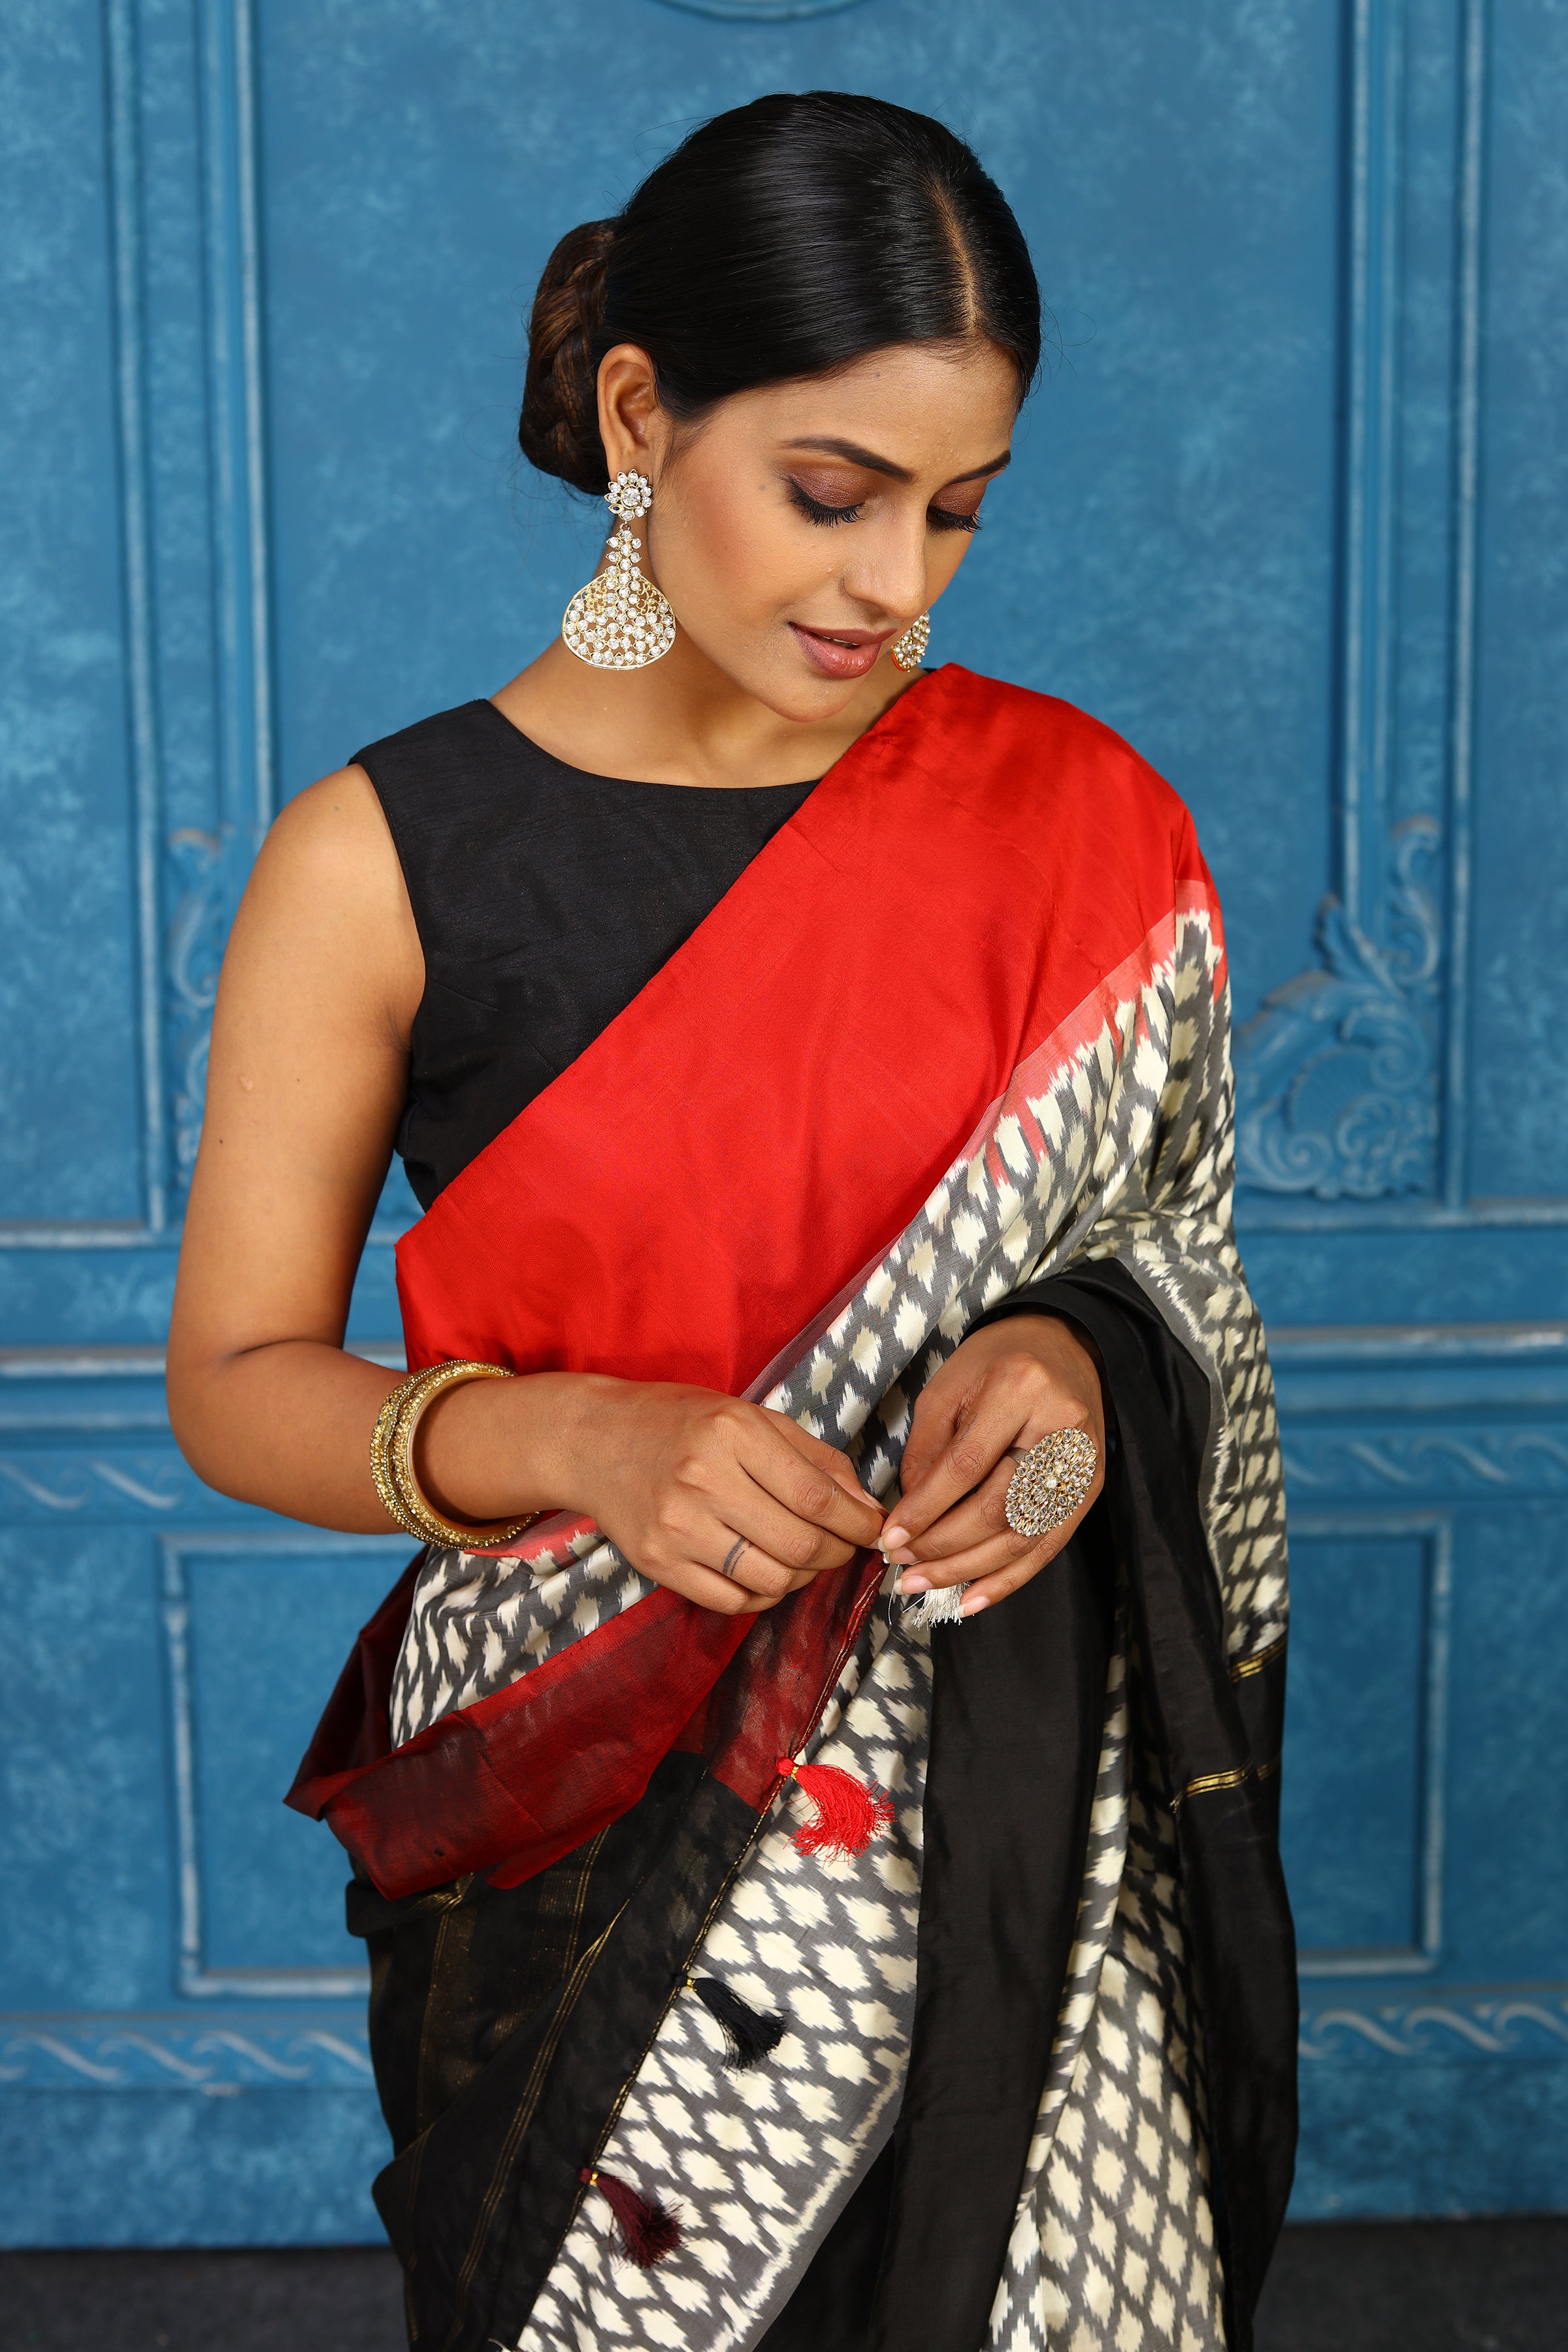 Buy beautiful off-white and grey pochampally ikkat sari online in USA with red black border. Look your best on festive occasions in latest designer sarees, pure silk sarees, Kanchipuram sarees, handwoven sarees, tussar silk sarees, embroidered sarees from Pure Elegance Indian clothing store in USA.-closeup